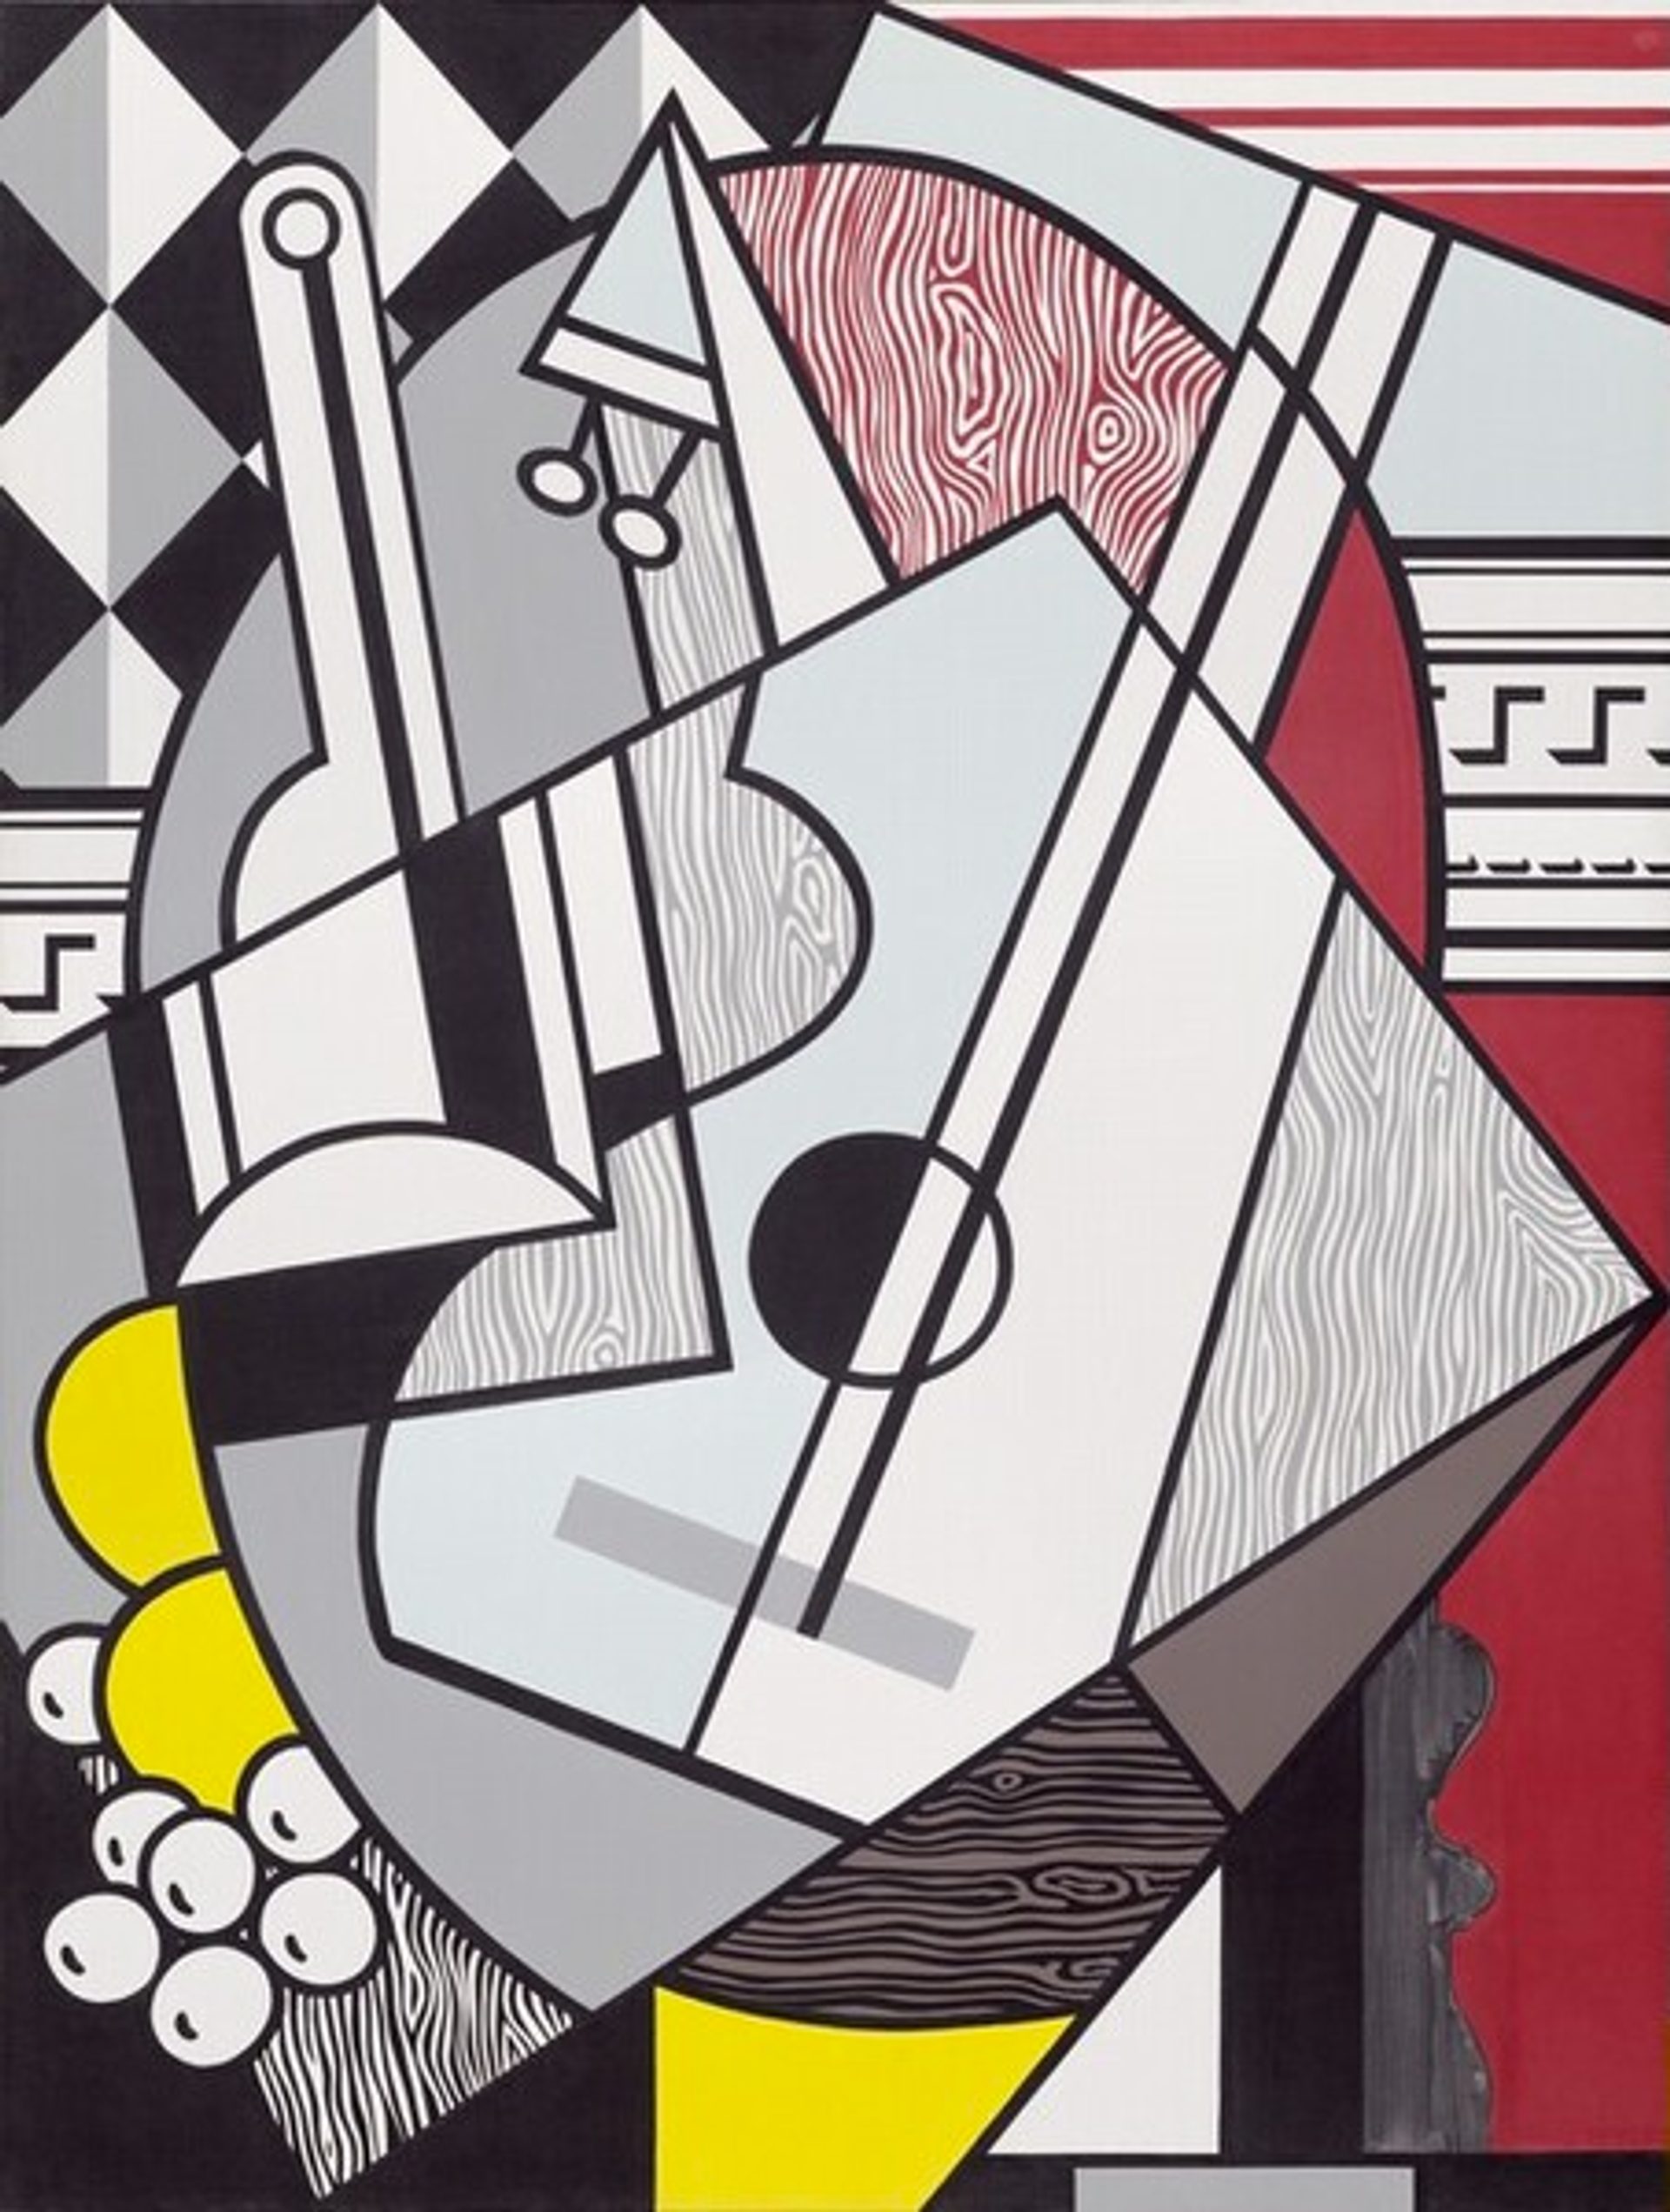 An abstracted, Cubist Still Life by Roy Lichtenstein. Using a monochromatic colour palette contrasted with yellow and red, it shows a musical instrument and a bowl of fruits in a fragmented perspective.